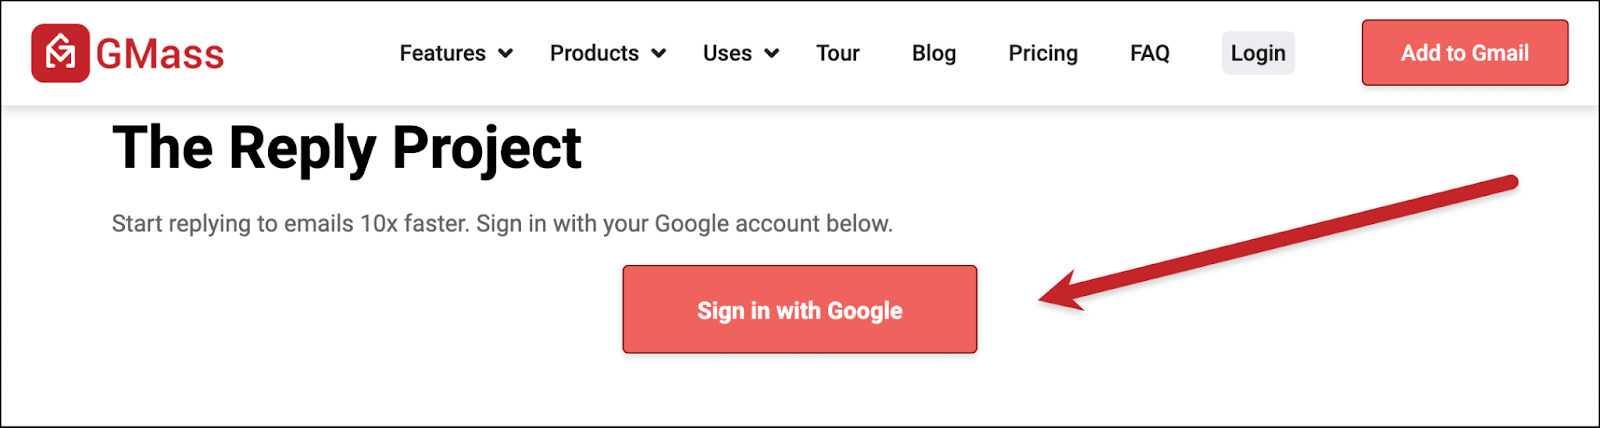 Sign into Google to use The Reply Project